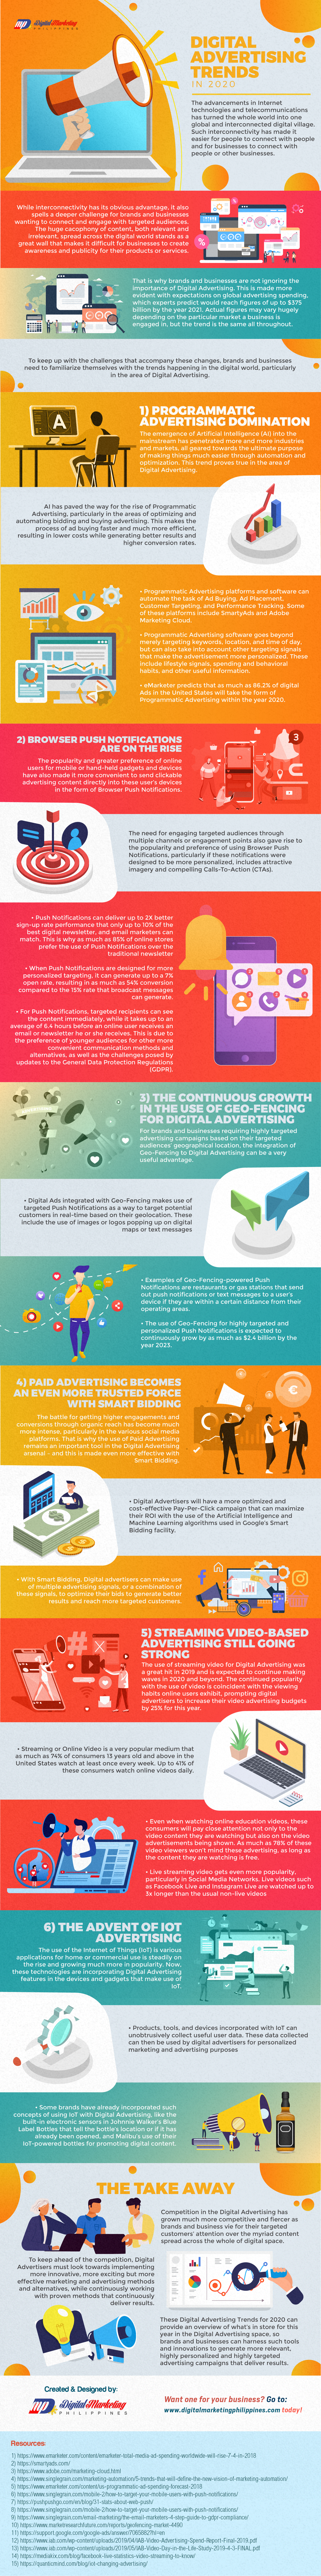 infographic ads